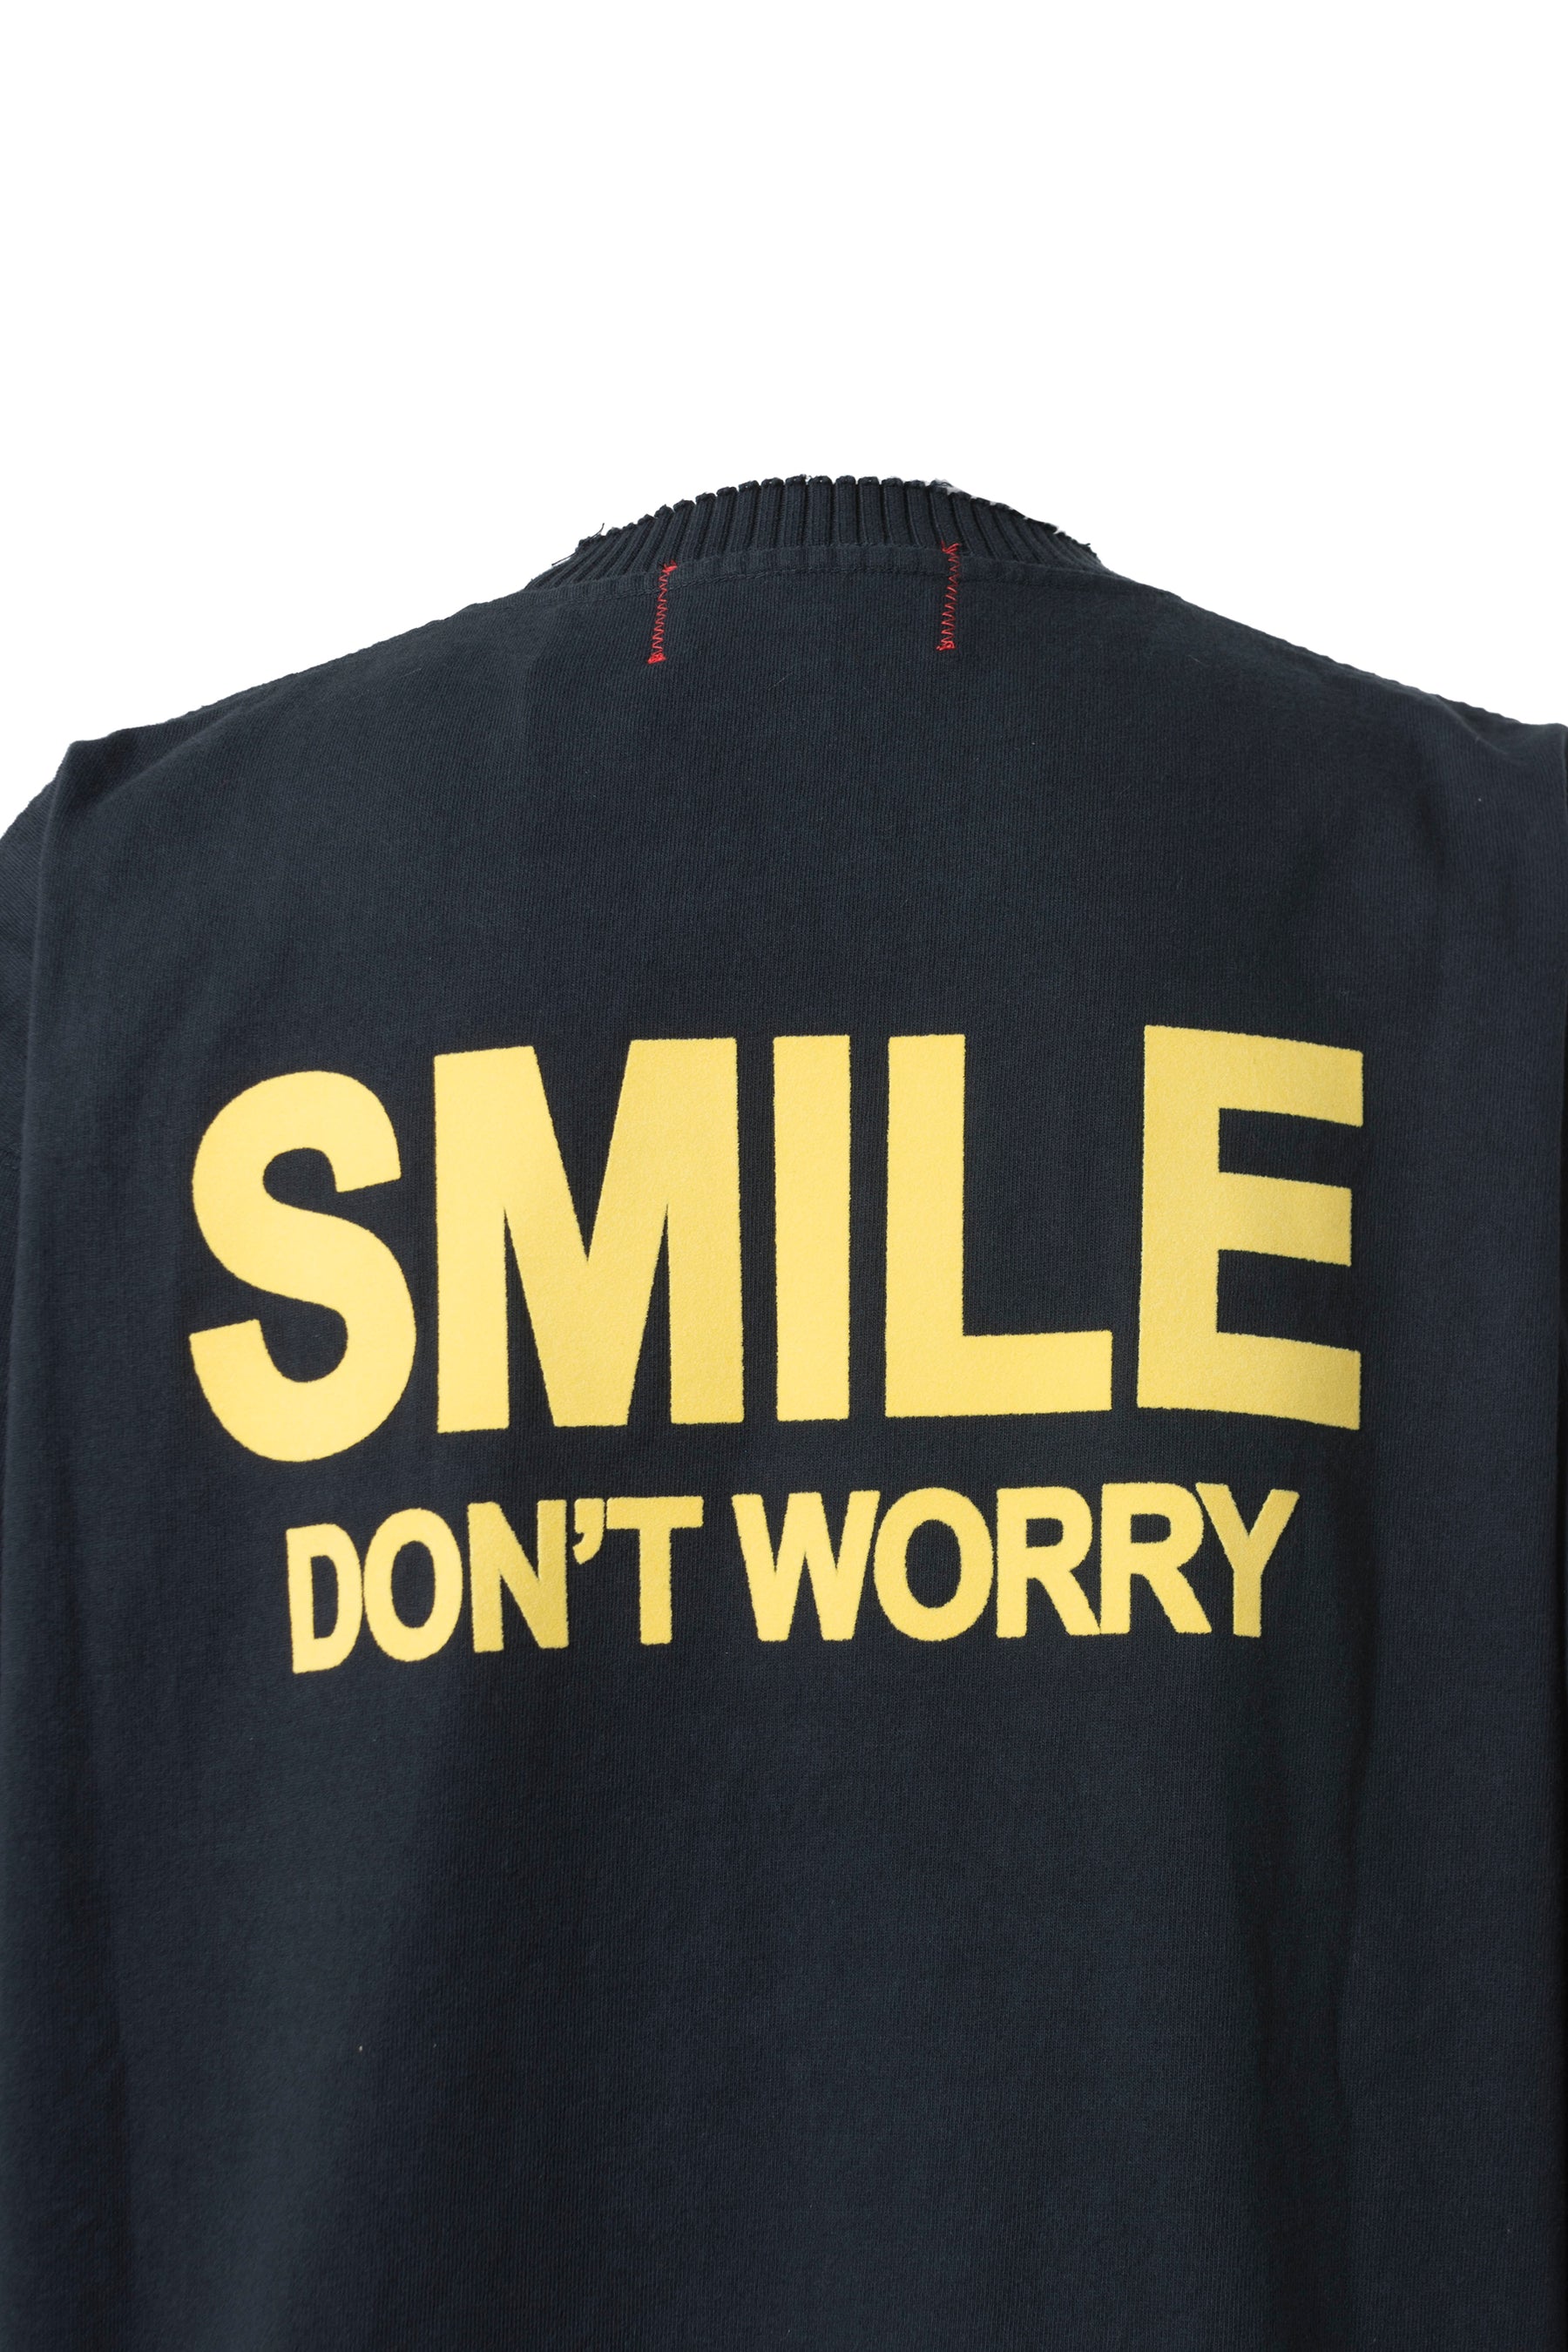 Perfect ribs BASIC LONG SLEEVE T-SHIRTS "SMILE DON'T WORRY" / BLK